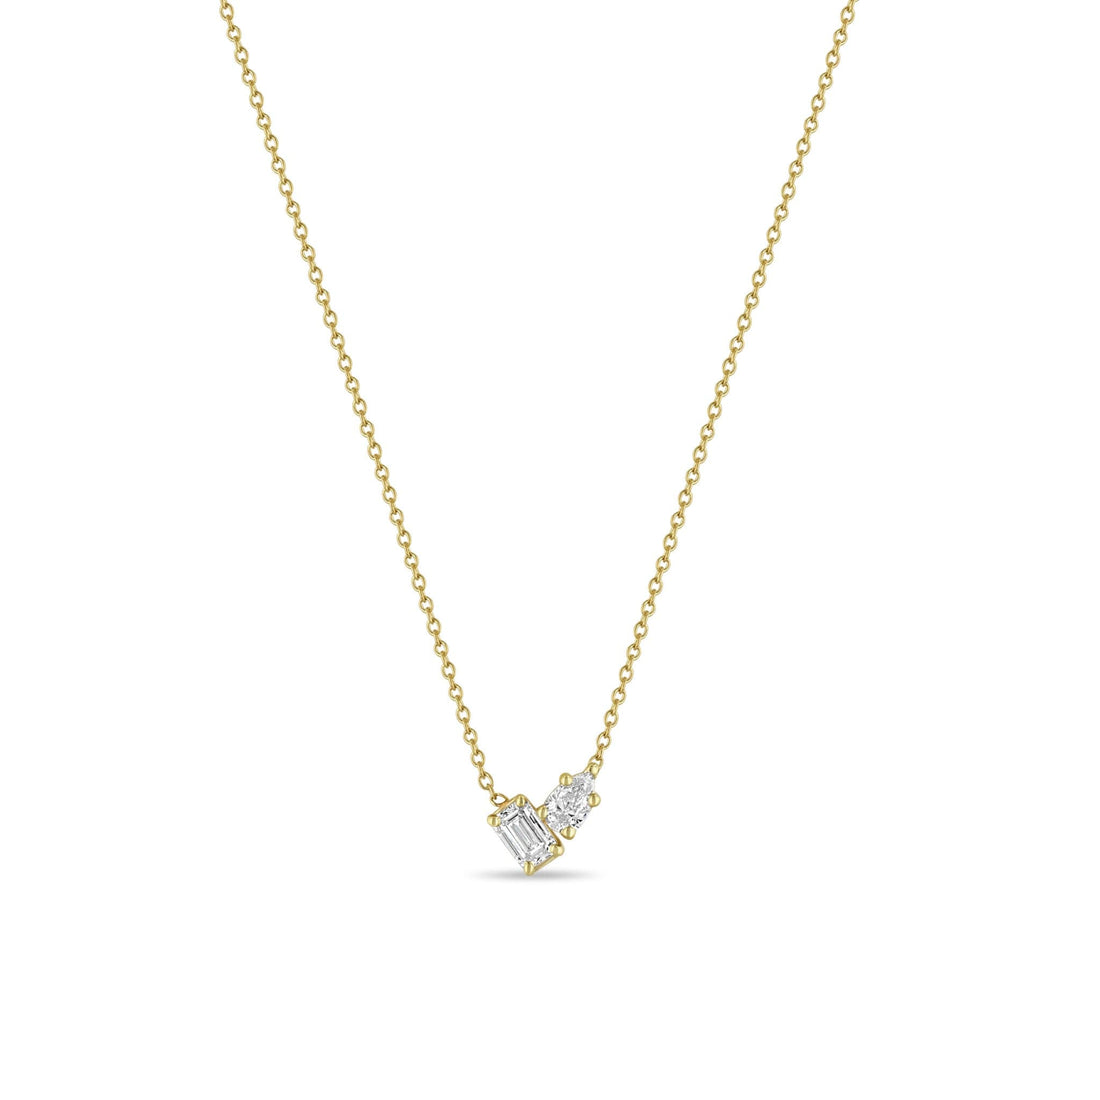 zoe-chicco-14k-yellow-gold-mixed-pear-emerald-cut-diamond-necklace-2msn-4-d